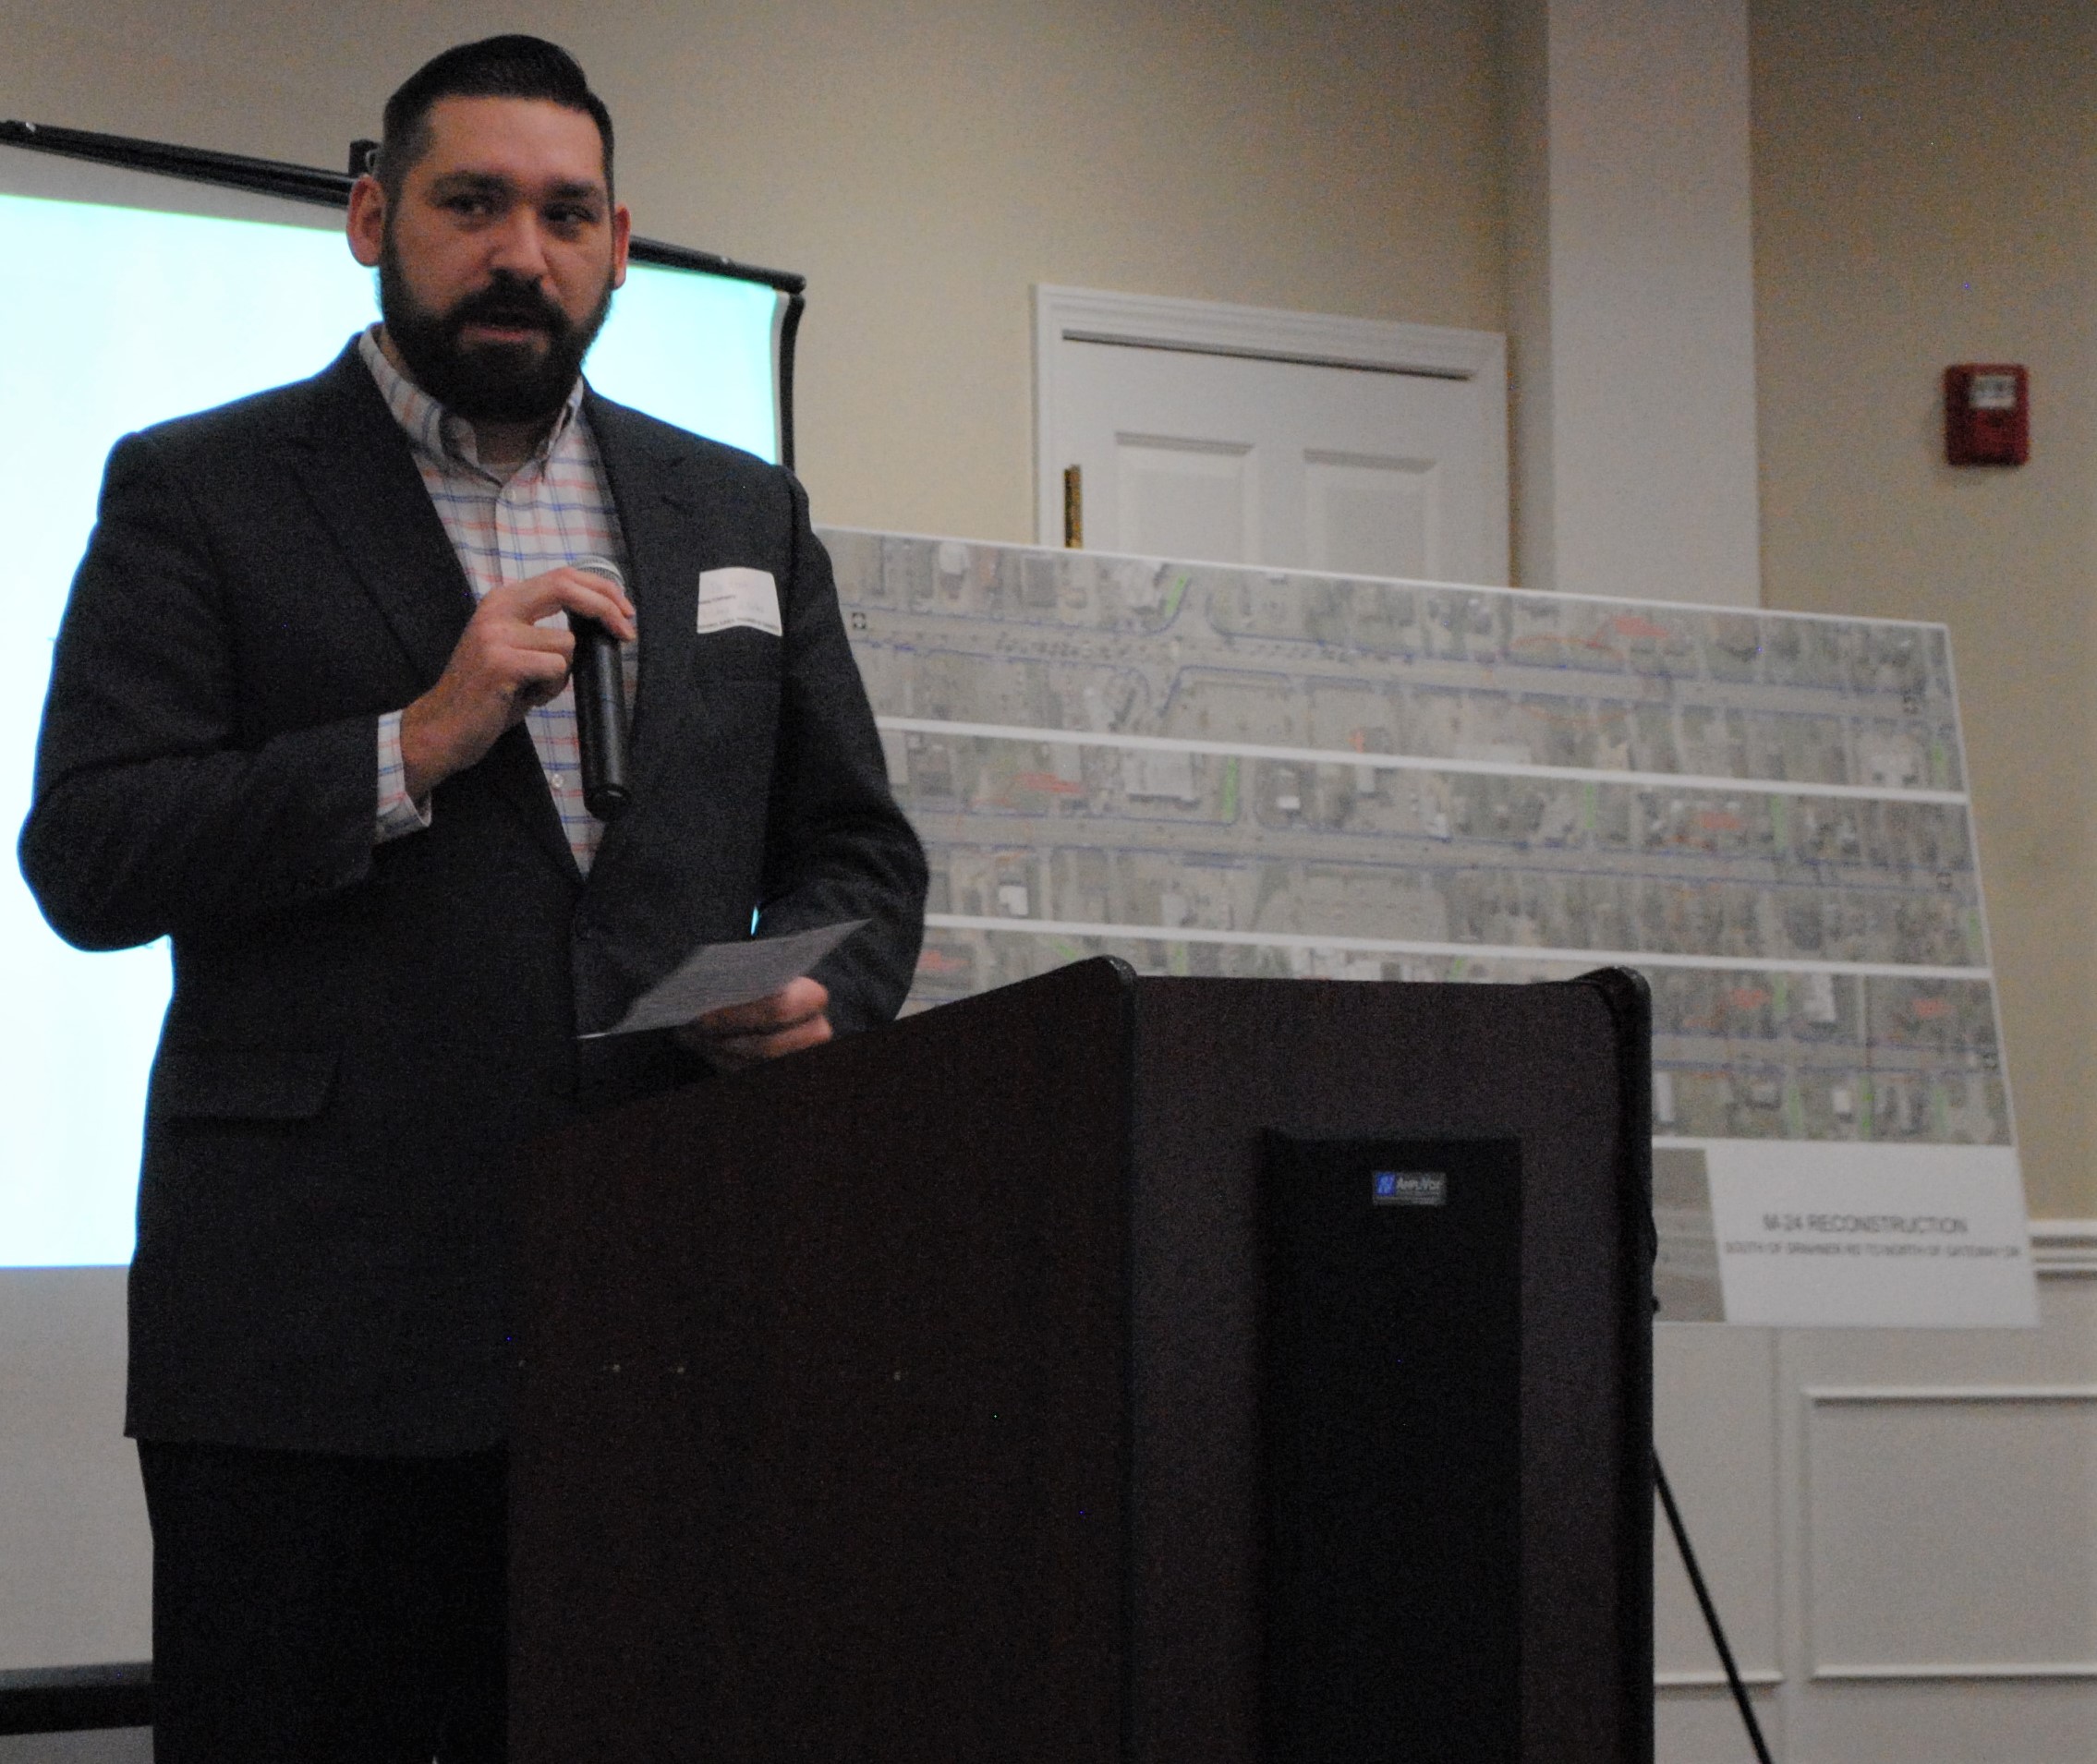 Oxford Village President Joe Frost spoke with optimism about the town’s future during the chamber of commerce’s community breakfast on Jan. 22. Photo by Shelby Tankersley.